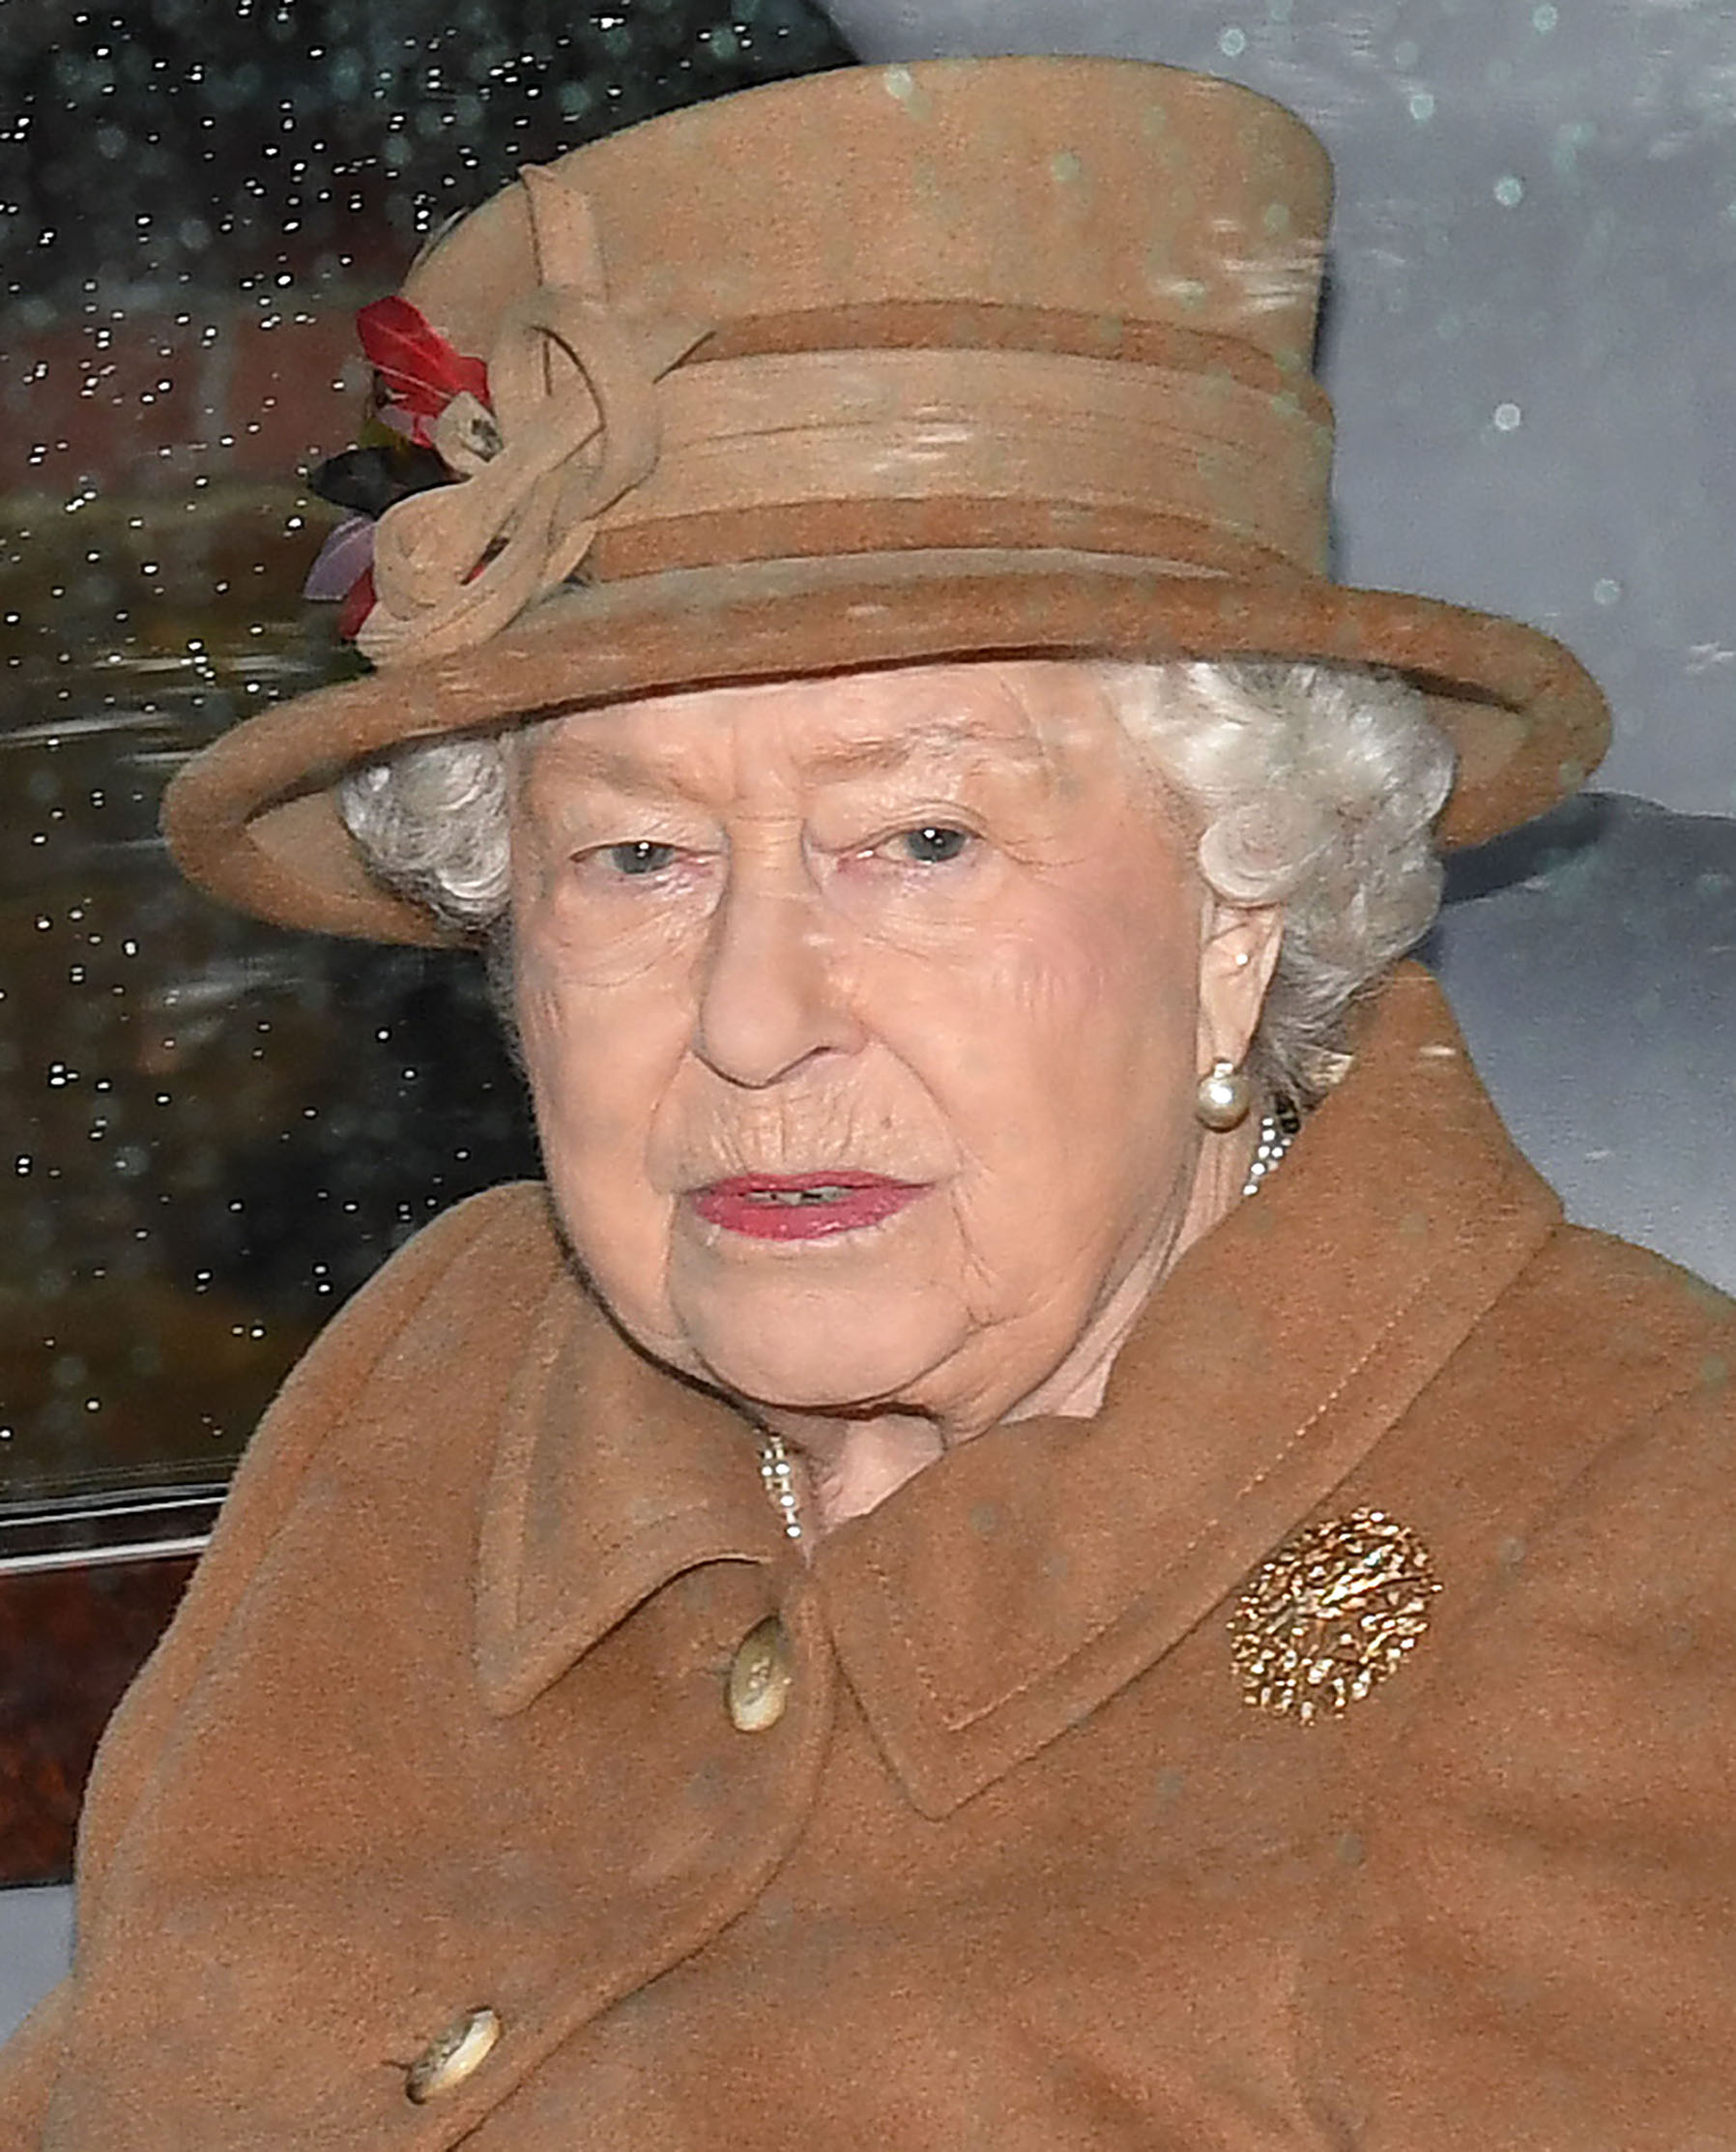 The Queen attends Sunday Service at St Mary Magdalene Church ahead of a reported meeting with Prince Harry, Prince Charles and Prince William tomorrow in Sandringham, Norfolk, UK, on the 12th January 2020.
12 Jan 2020, Image: 492296050, License: Rights-managed, Restrictions: NO United Kingdom, Model Release: no, Credit line: James Whatling / MEGA / Mega Agency / Profimedia